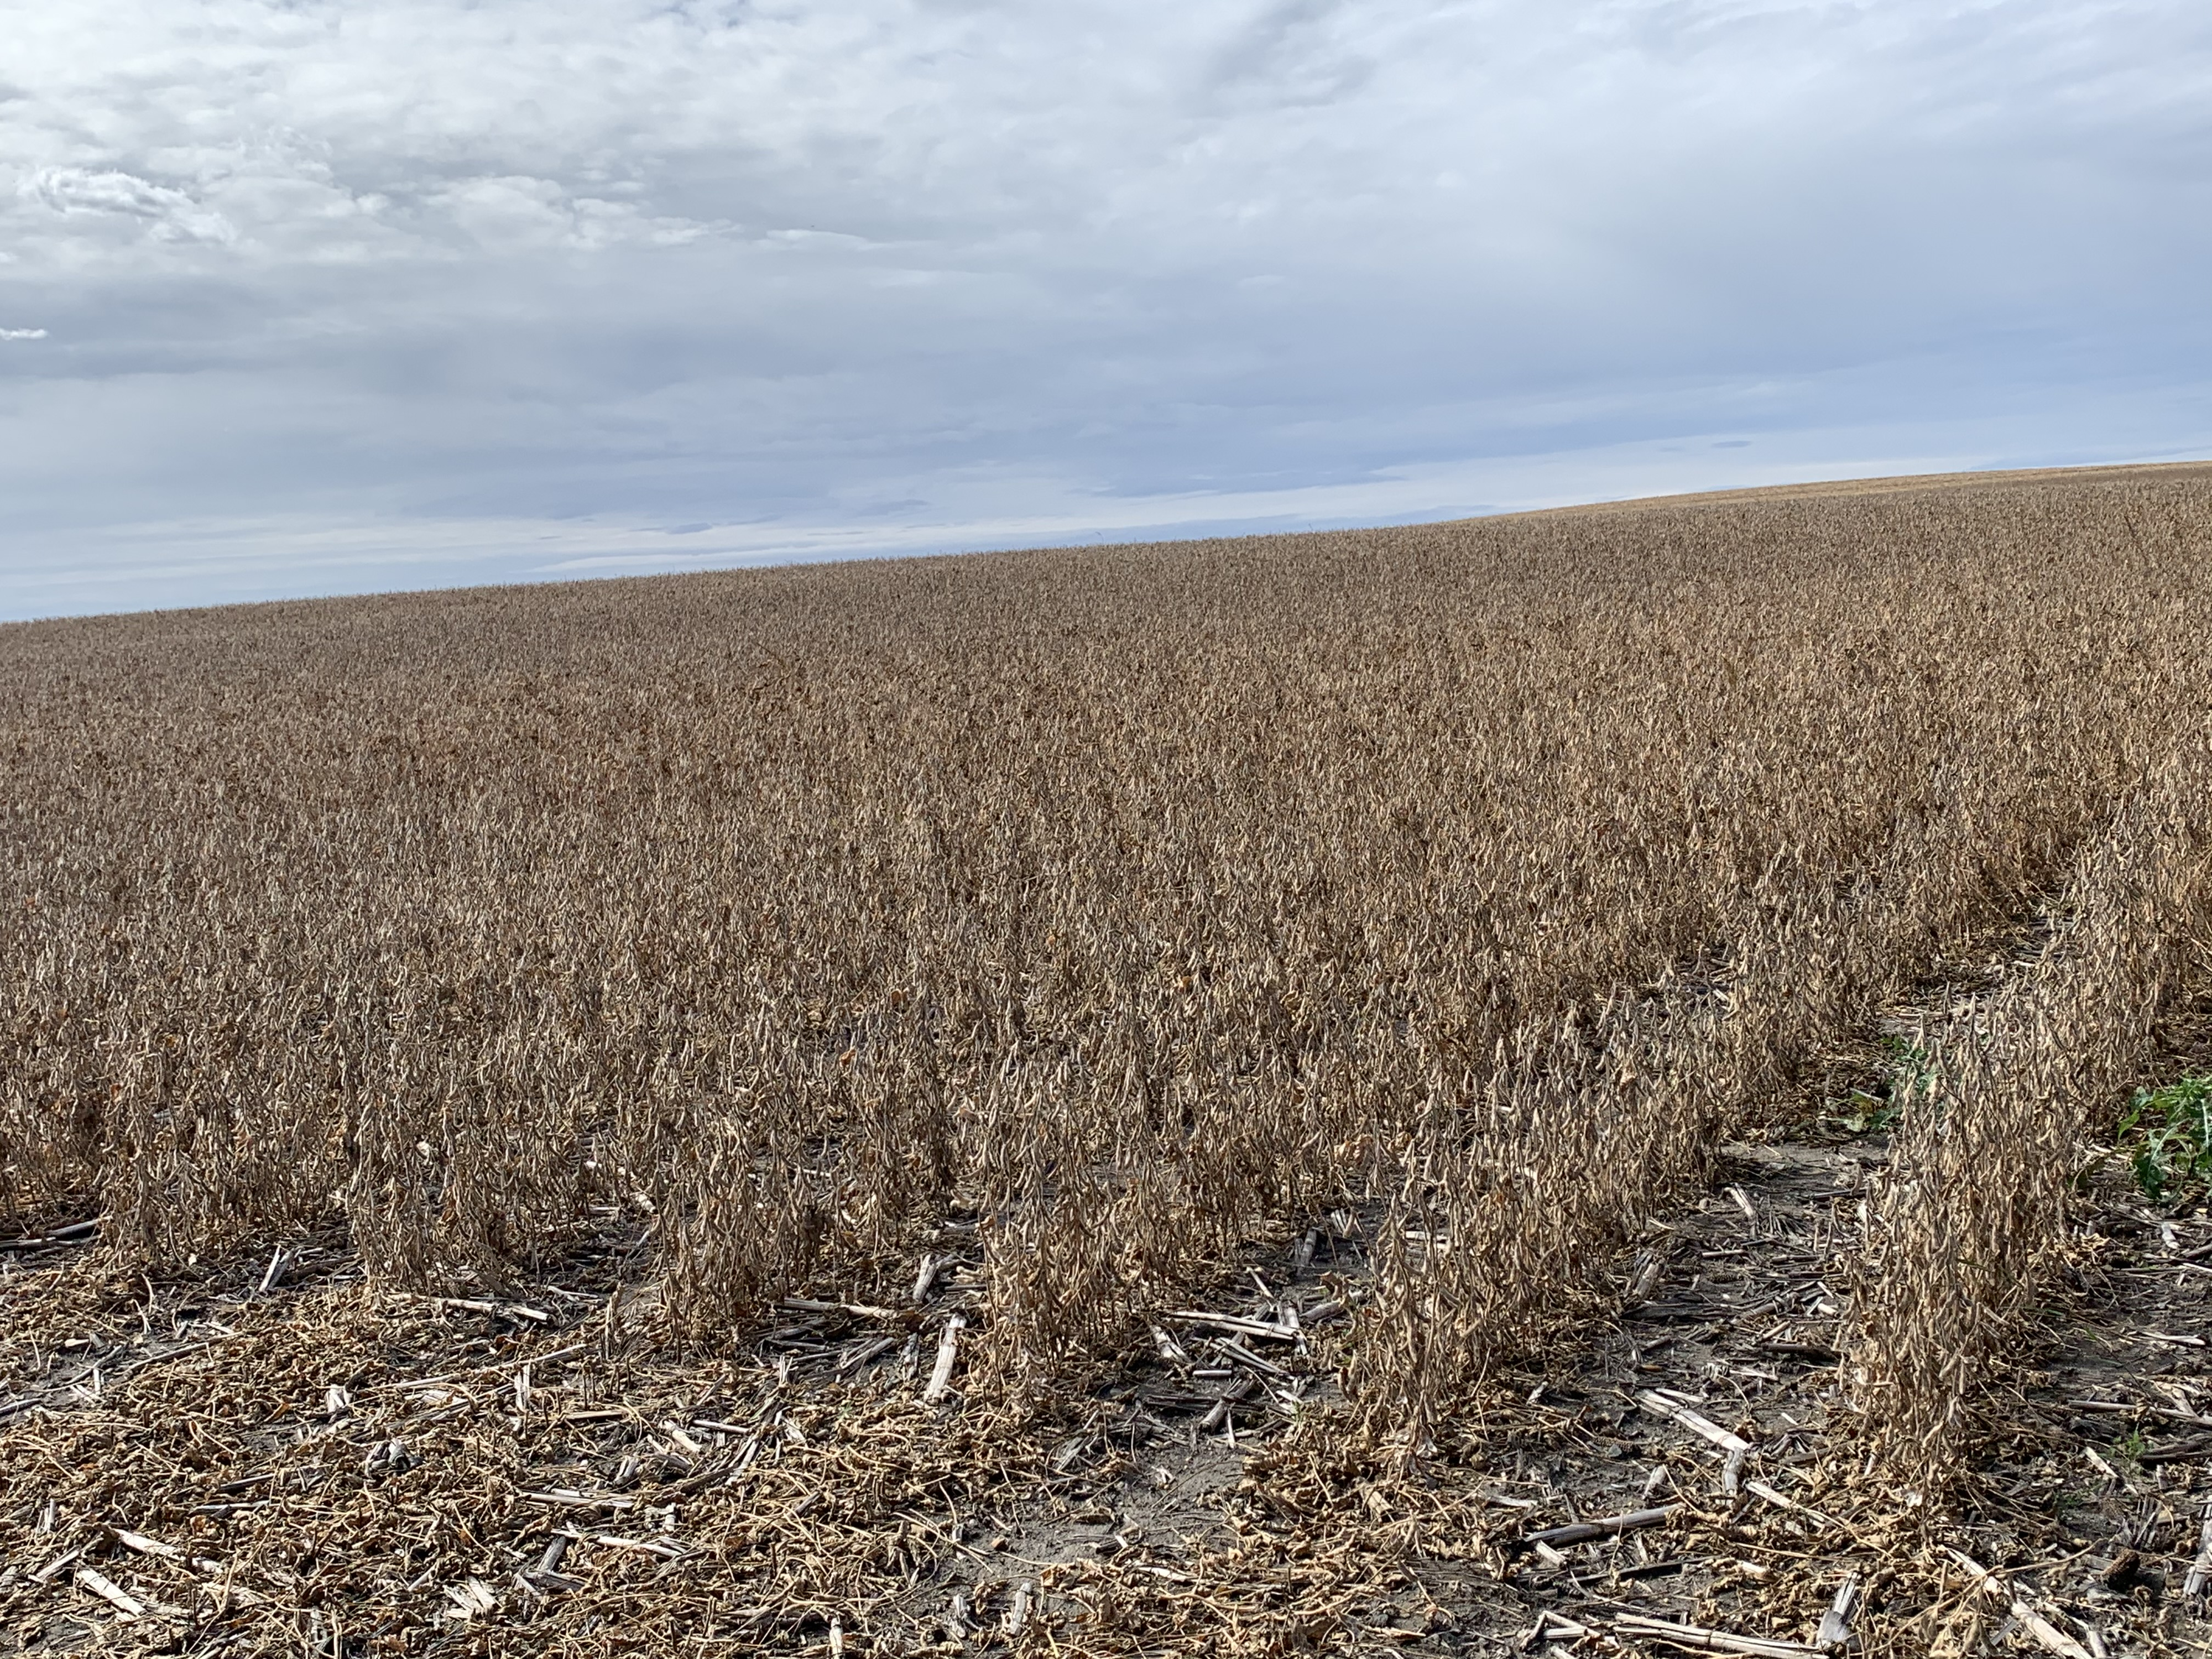 Mid-morning Ag News, March 8, 2021: Corn and soybean acres in high demand going into the 2021 planting season